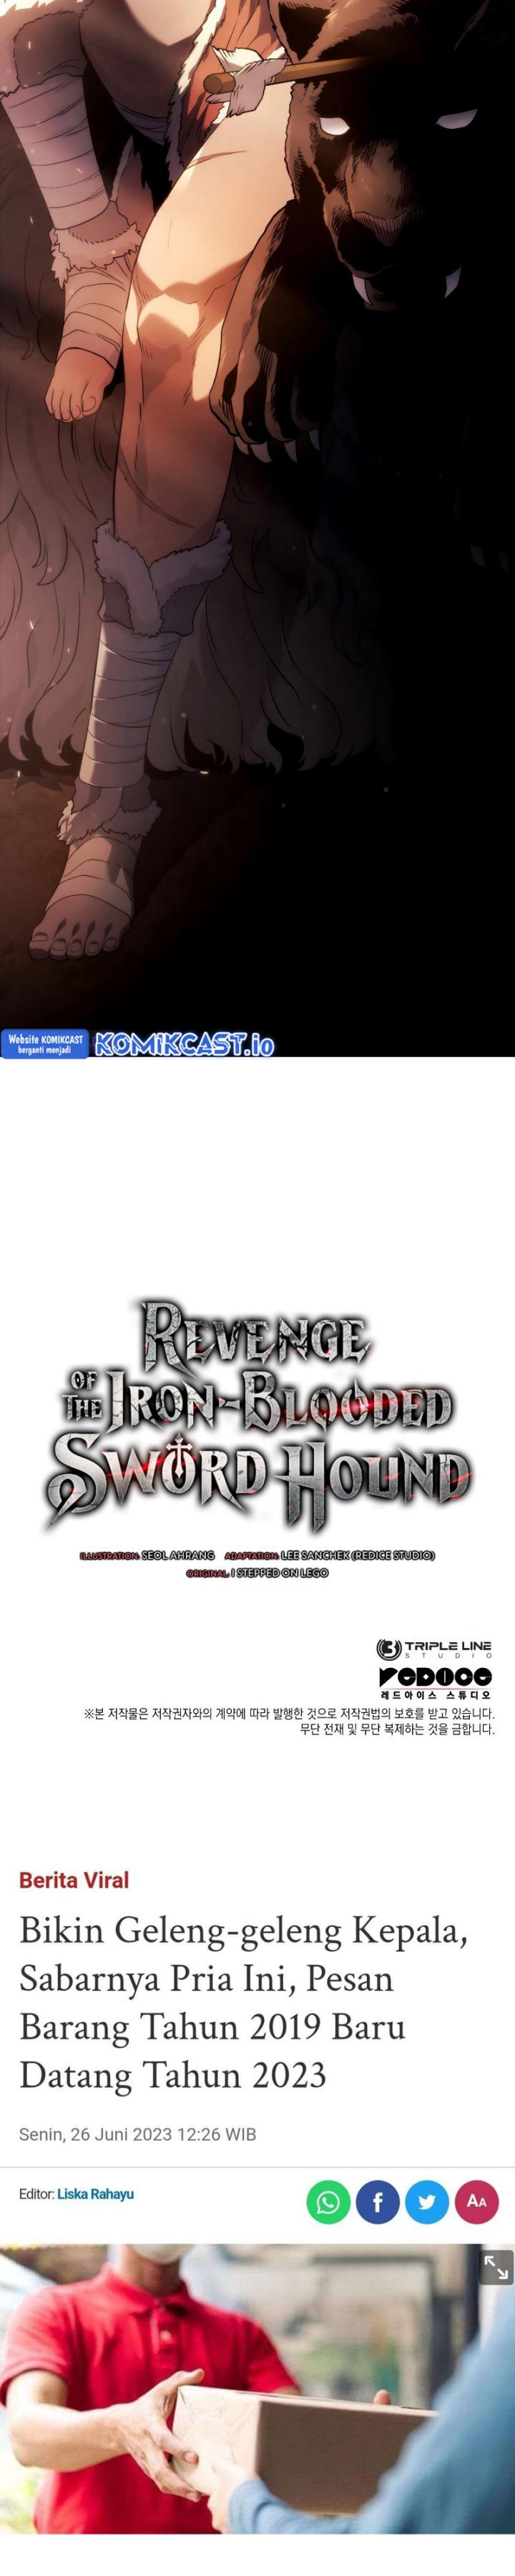 Revenge Of The Iron-blooded Sword Hound Chapter 32